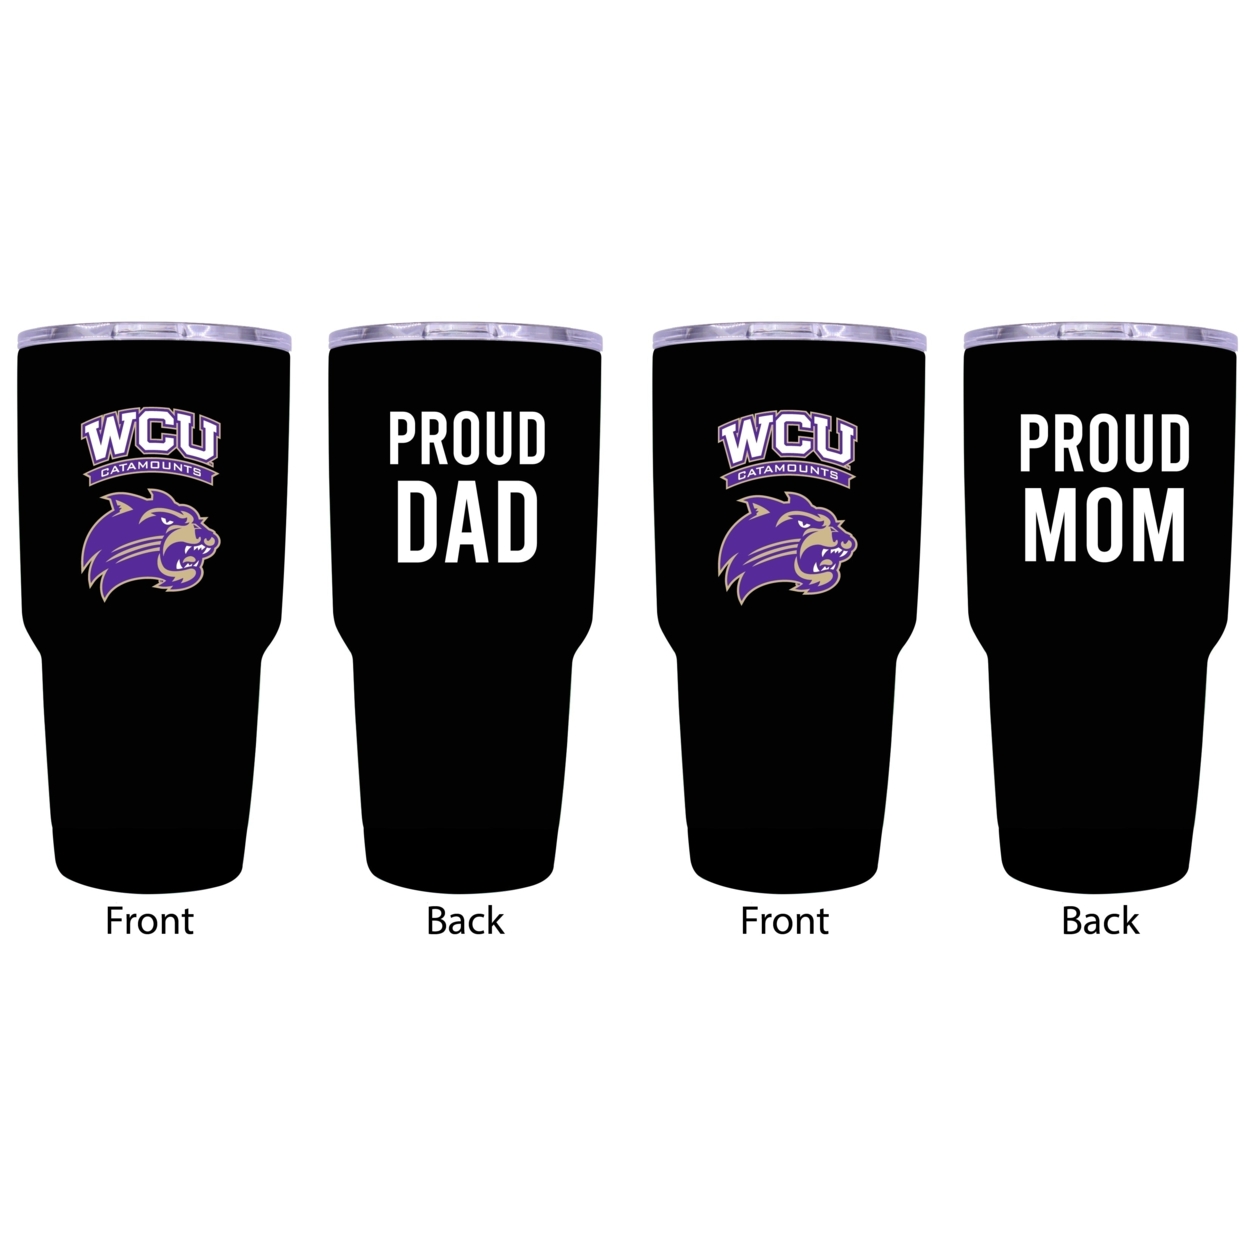 Western Carolina University Proud Mom And Dad 24 Oz Insulated Stainless Steel Tumblers 2 Pack Black.